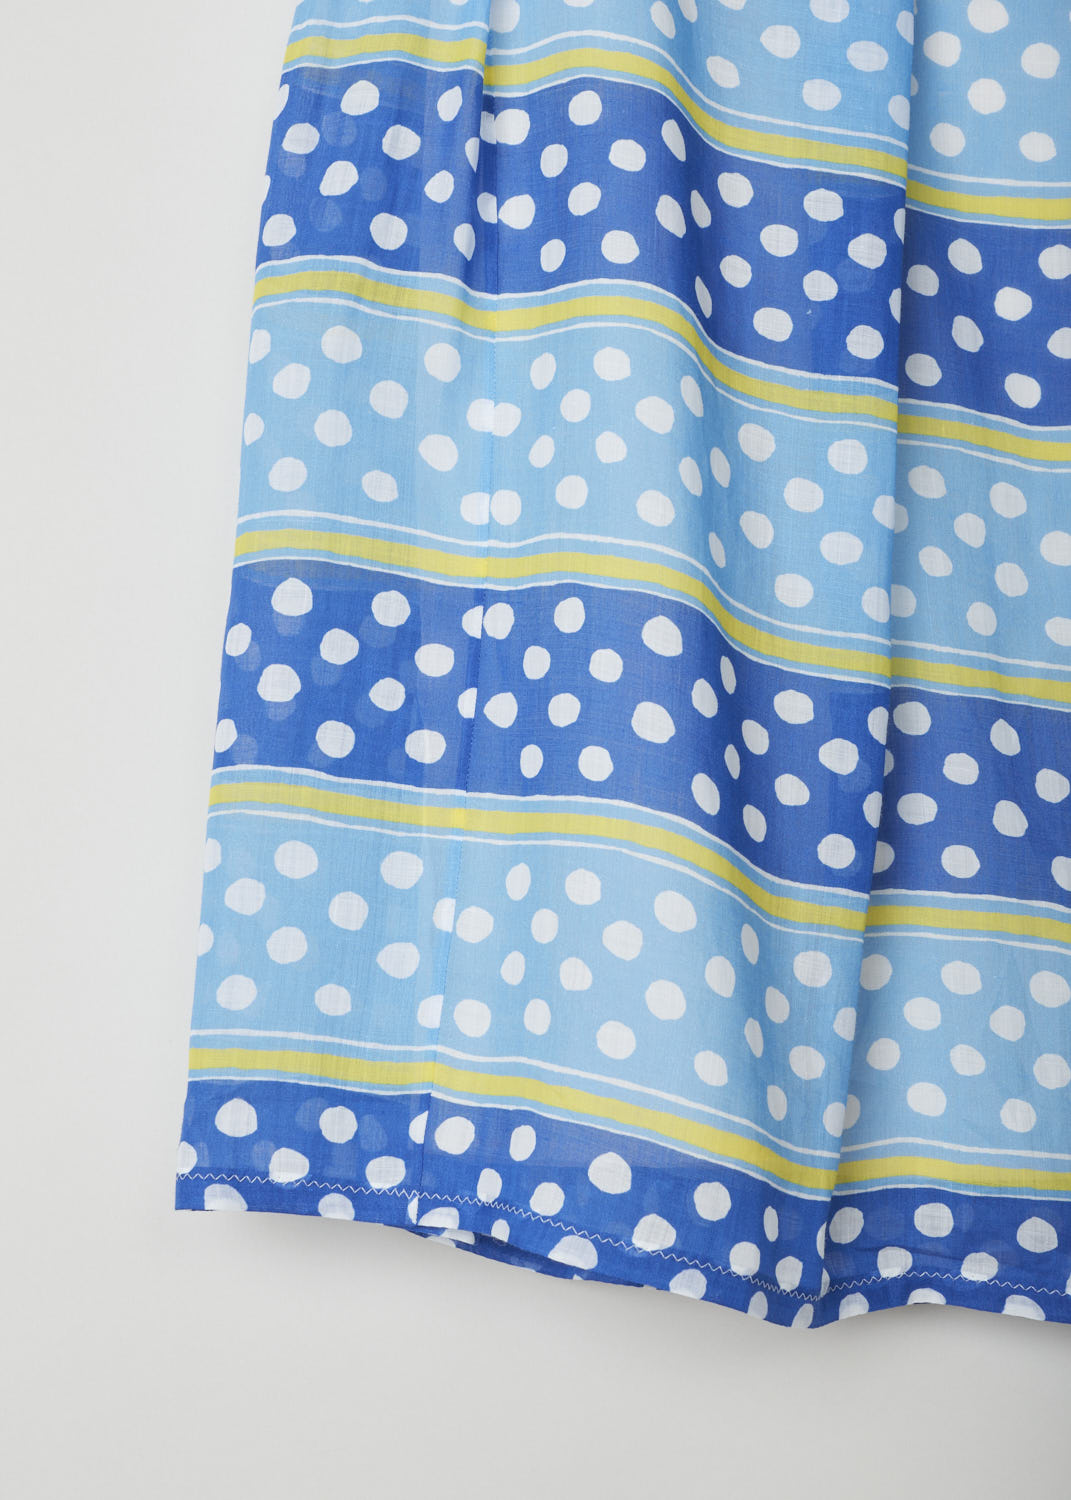 MARNI, COLORFUL DOTS AND STRIPES SKIRT, GOMA0420A0_UTR023_DSB57, Blue, Print, Detail 1, This colorful dots and stripes midi skirt is pleated throughout. The skirt has a layered hem around the waist with white stitching. In the back the concealed zipper and snap closure can be found.